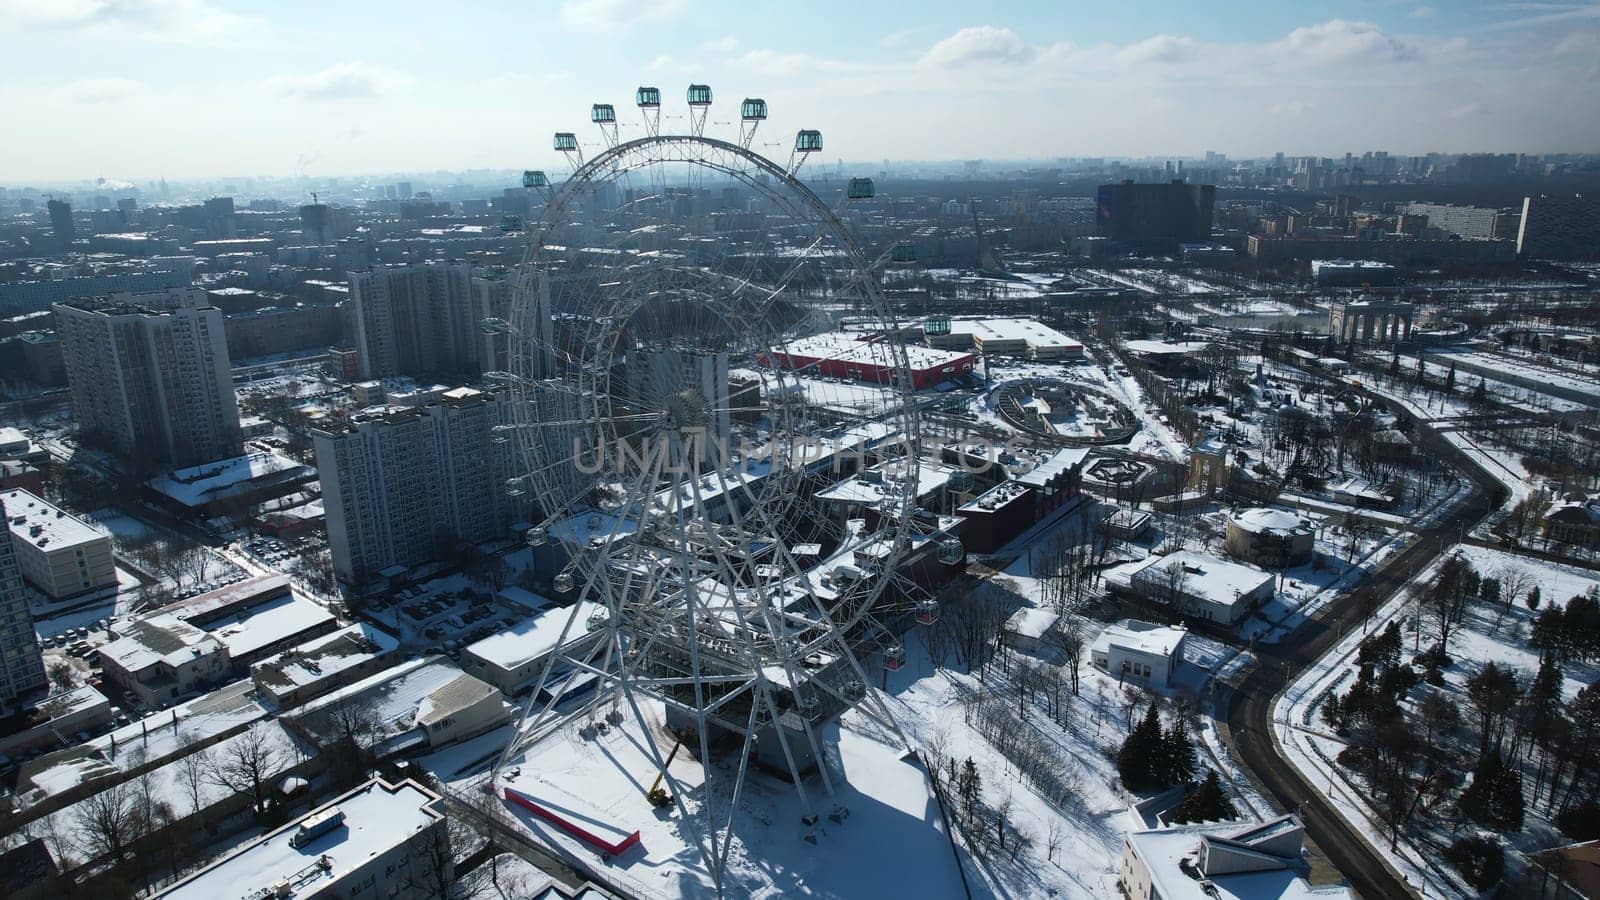 Top view of big Ferris wheel in winter. Creative. Beautiful urban landscape with Ferris wheel in city center in winter. Ferris wheel in center of big city on sunny winter day by Mediawhalestock